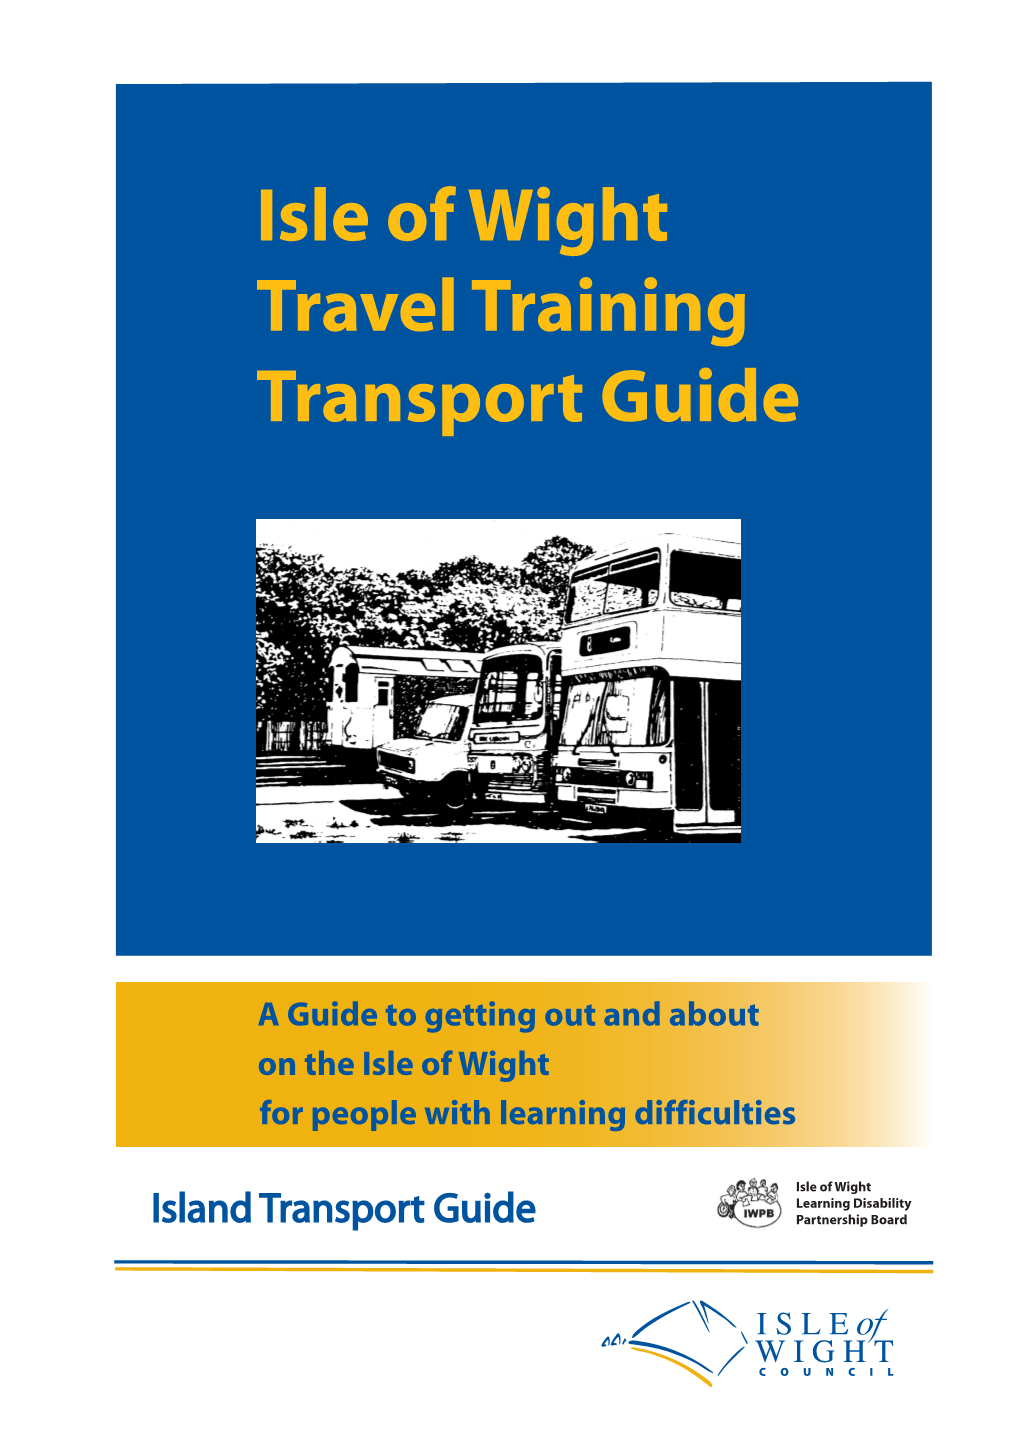 Isle of Wight Travel Training Transport Guide